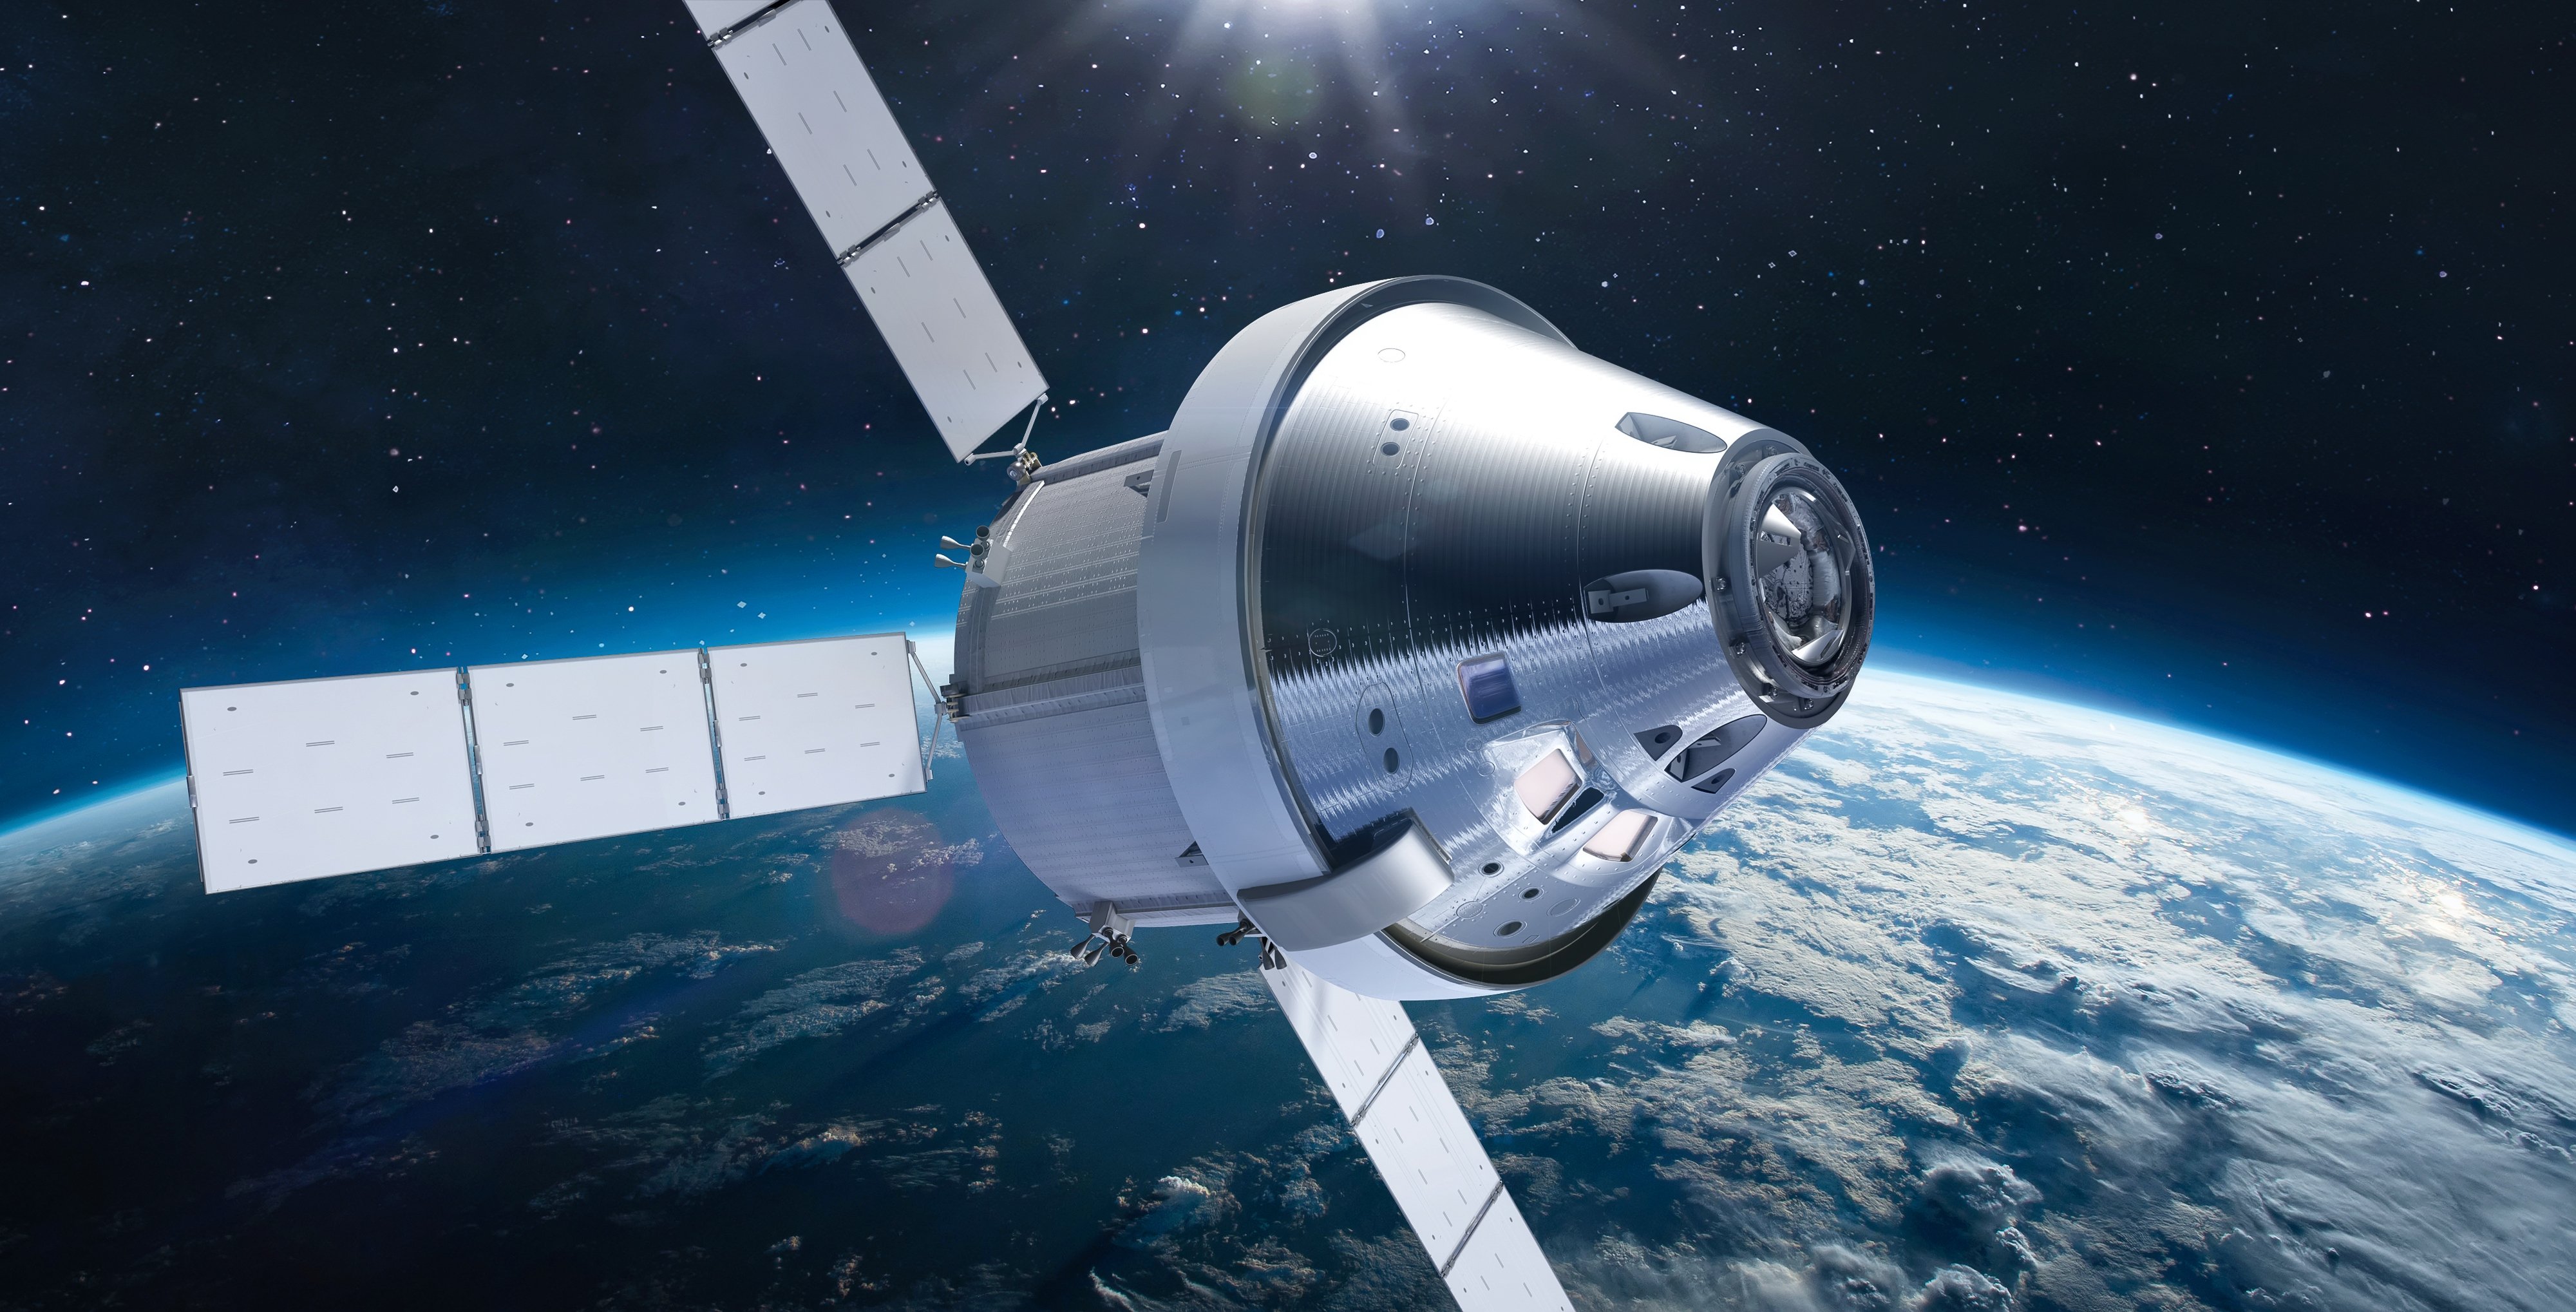 The Orion spacecraft in space